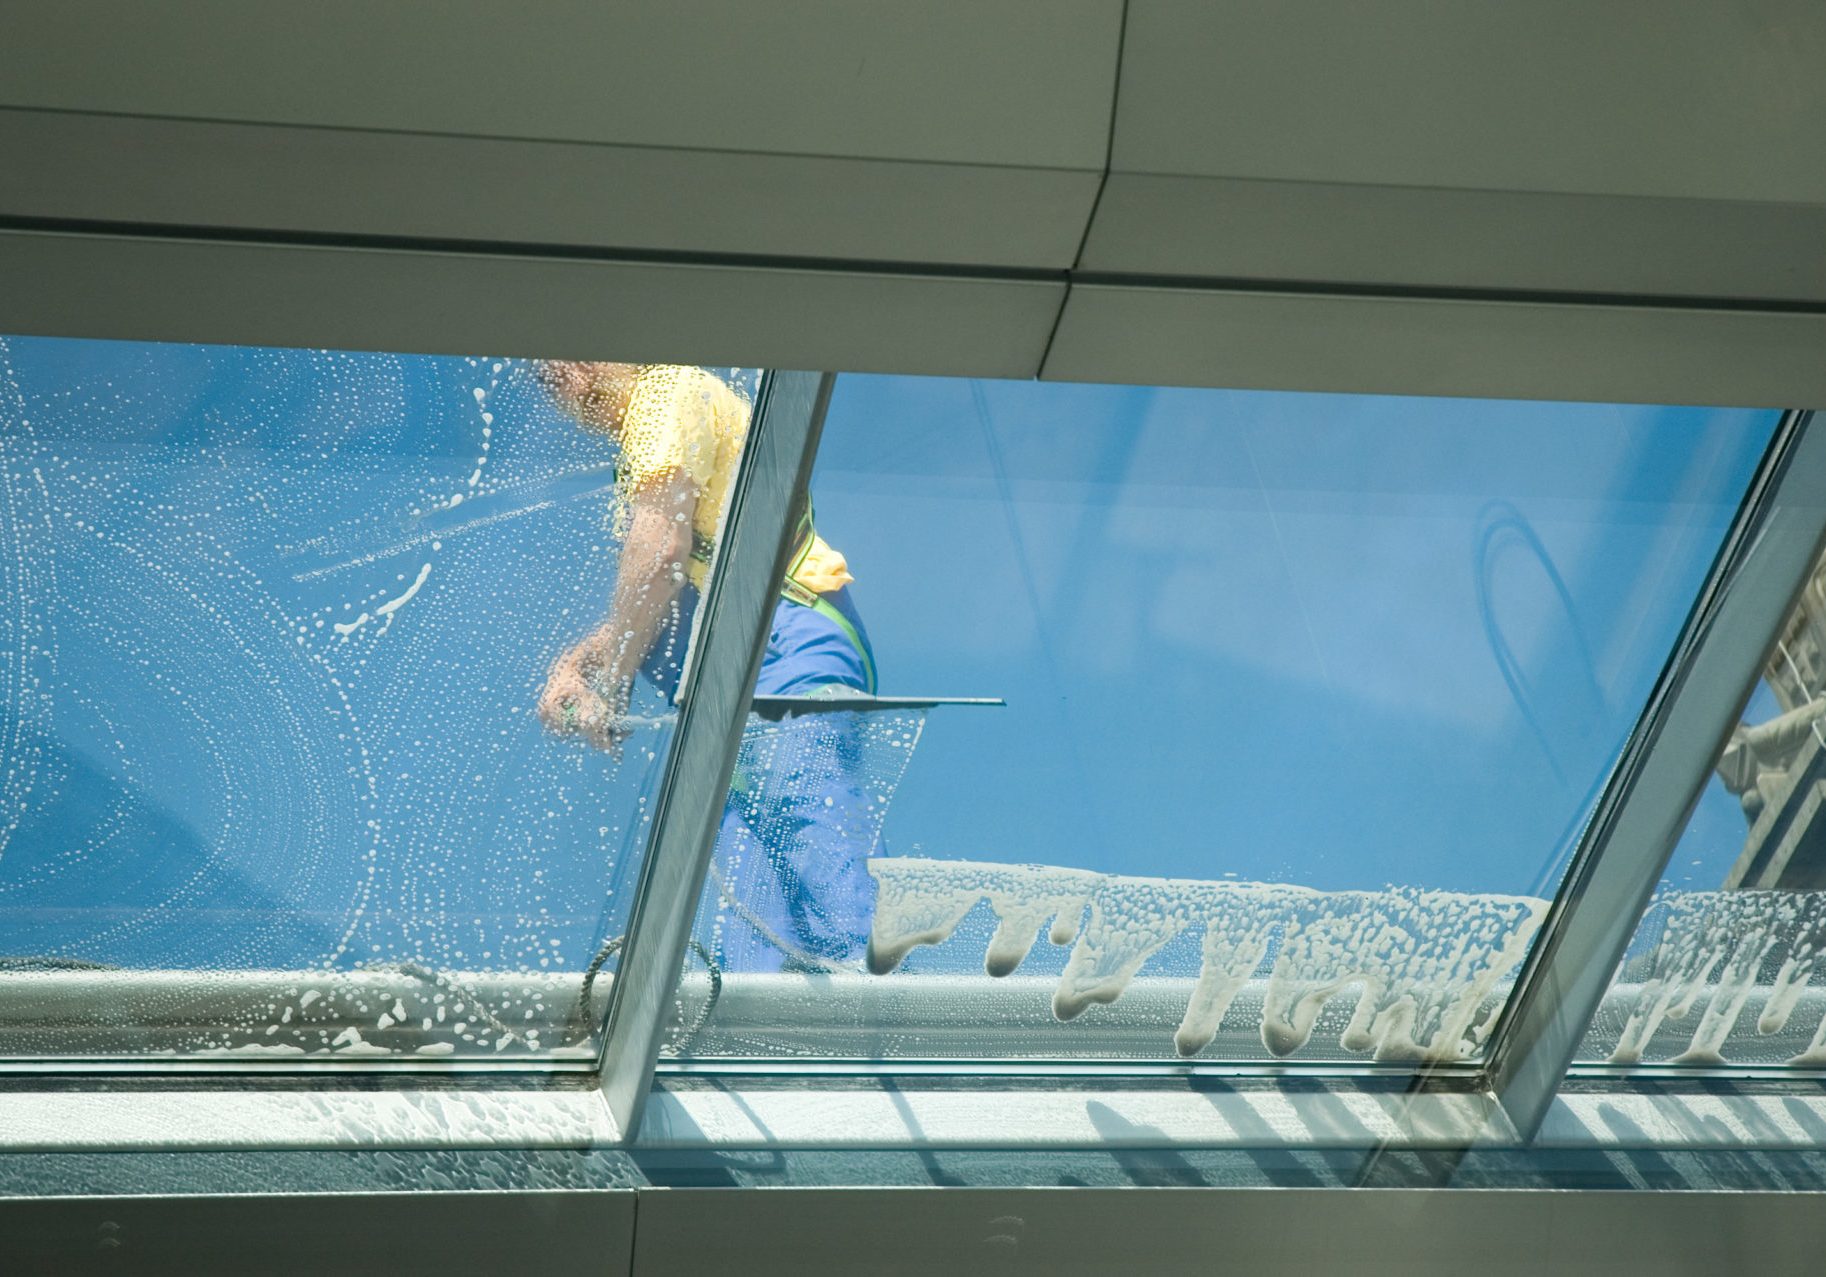 worker cleaning windows